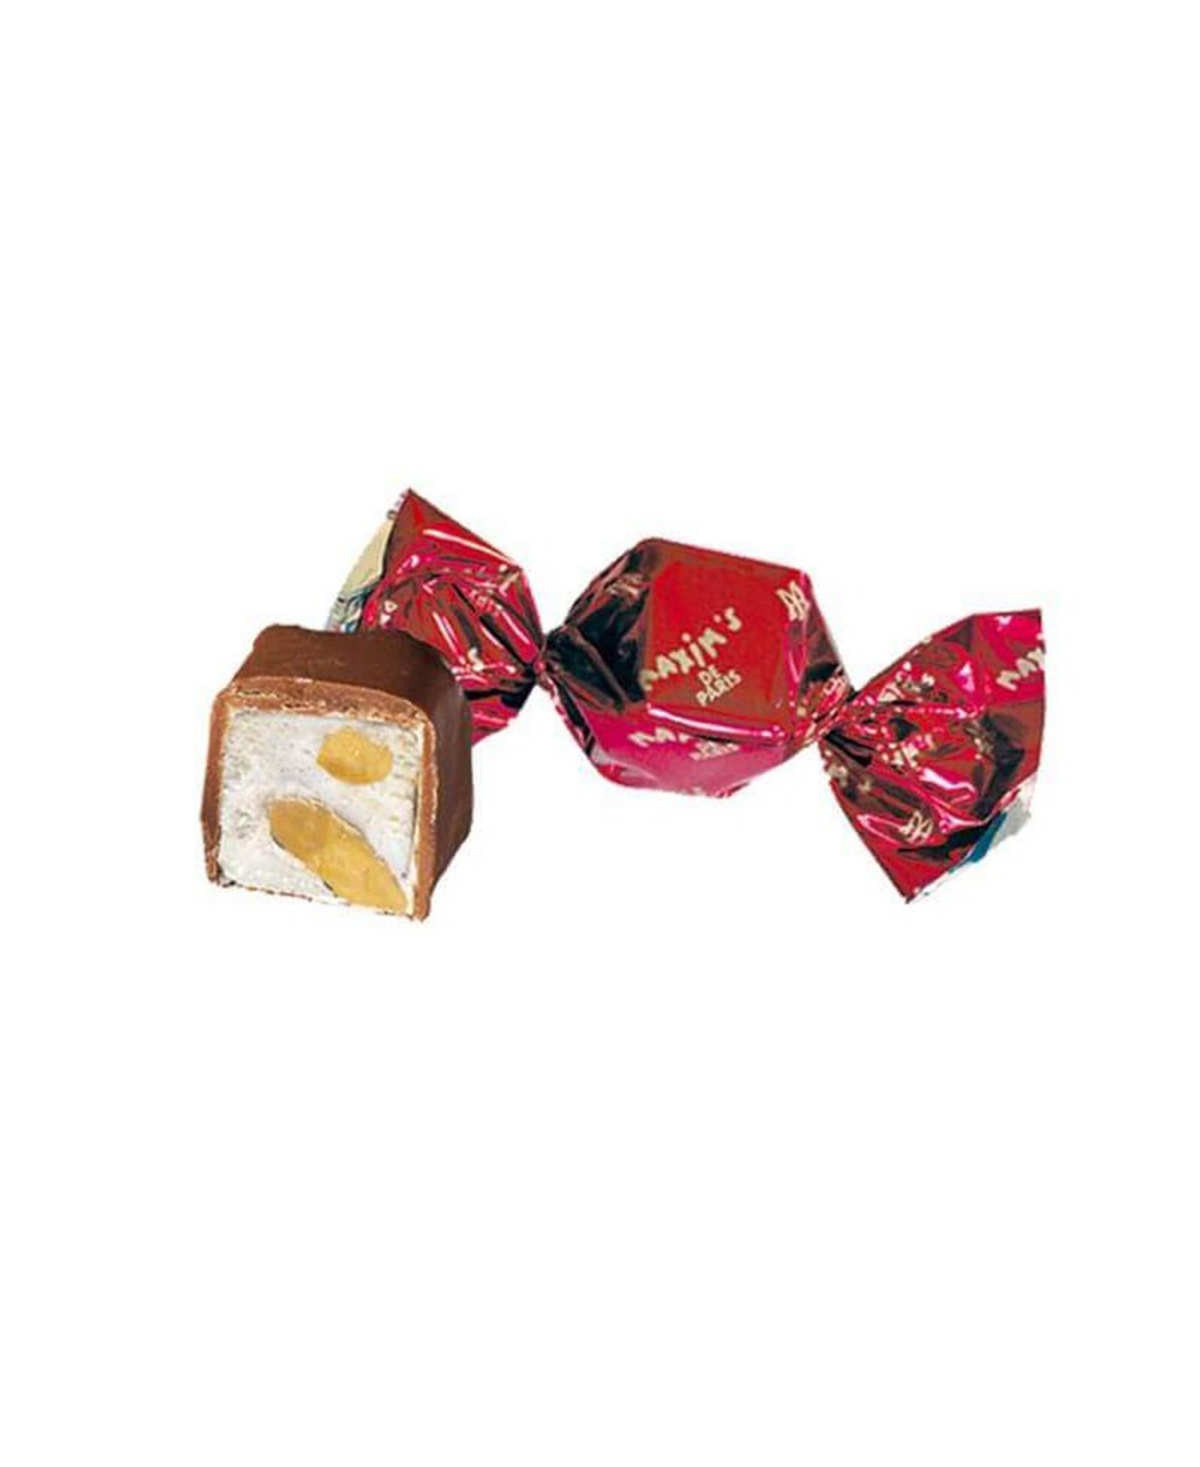 Shop Maxim's De Paris Heart Shaped Tin Box Filled With Chocolate Covered Nougats In No Color